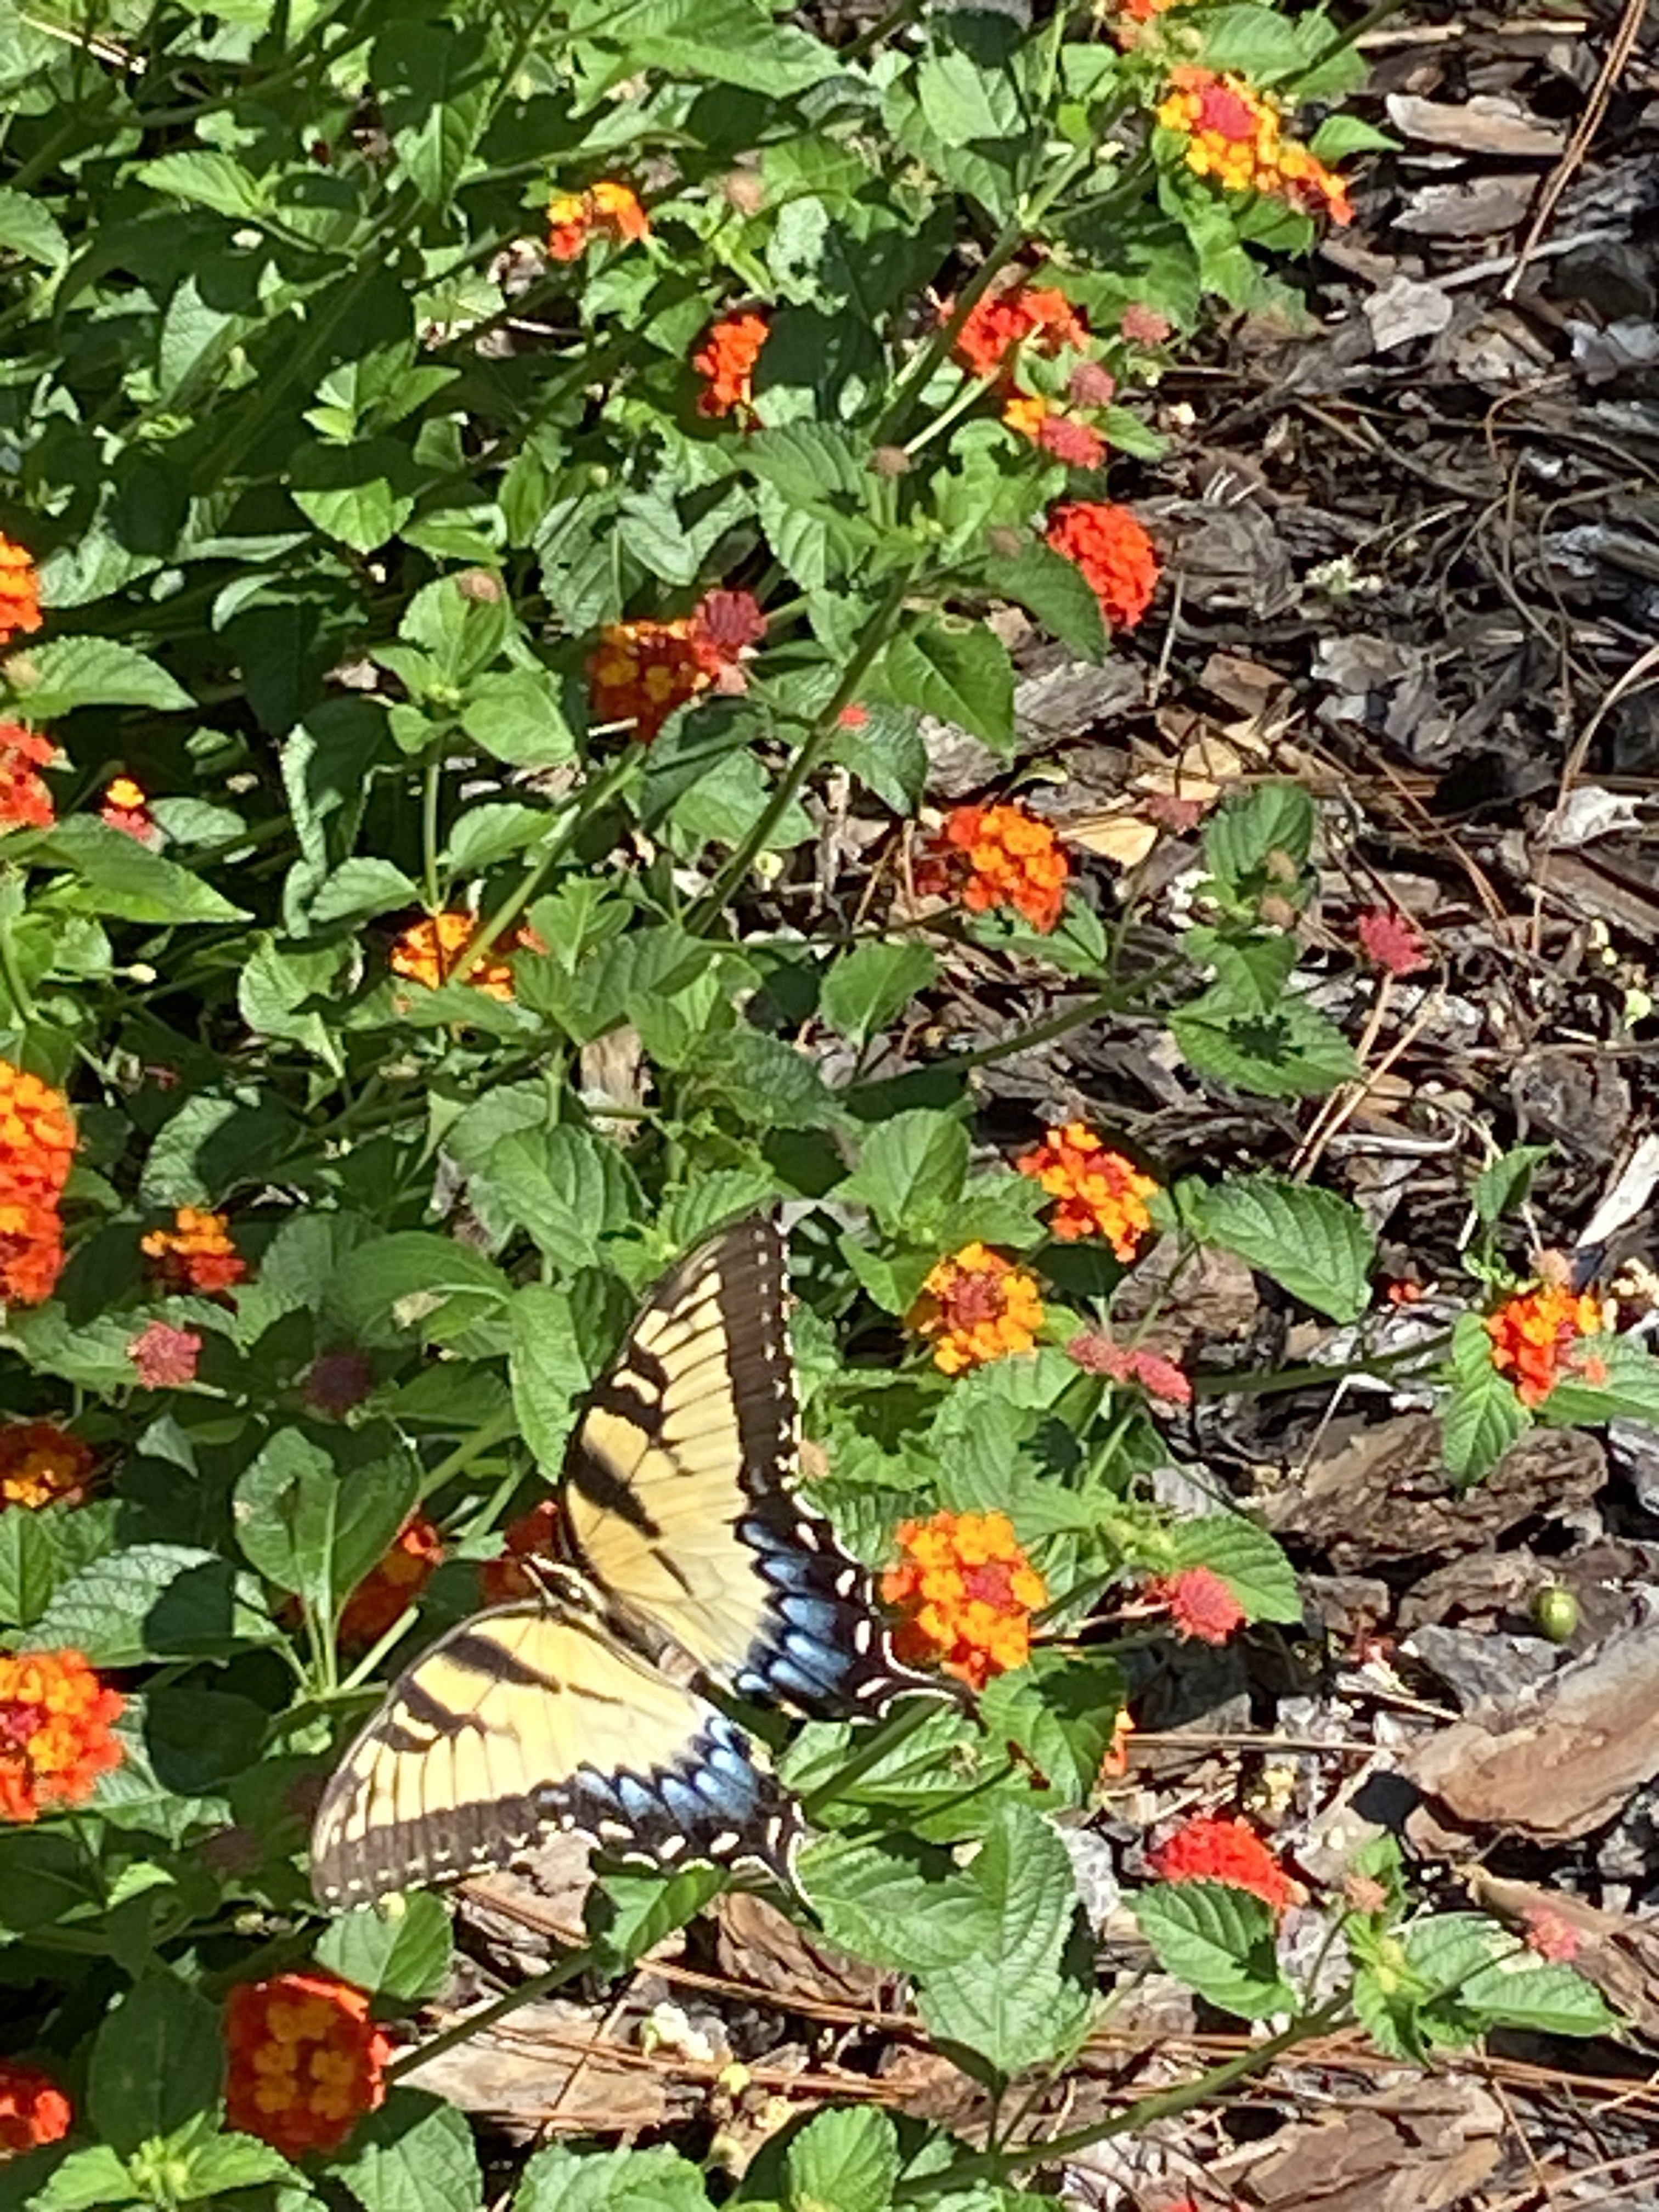 A Lantana and a butterfly